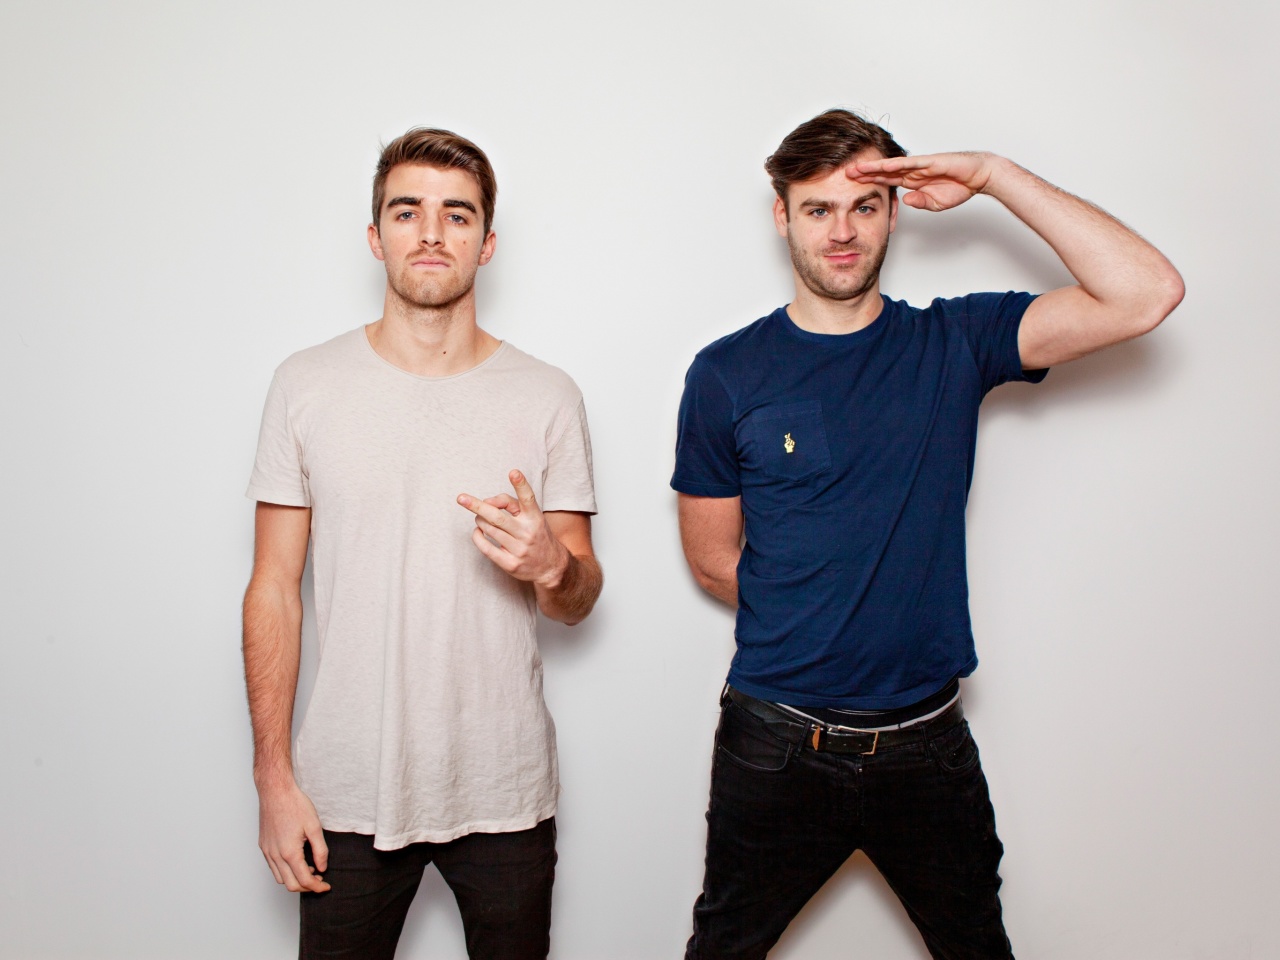 The Chainsmokers with Andrew Taggart and Alex Pall screenshot #1 1280x960